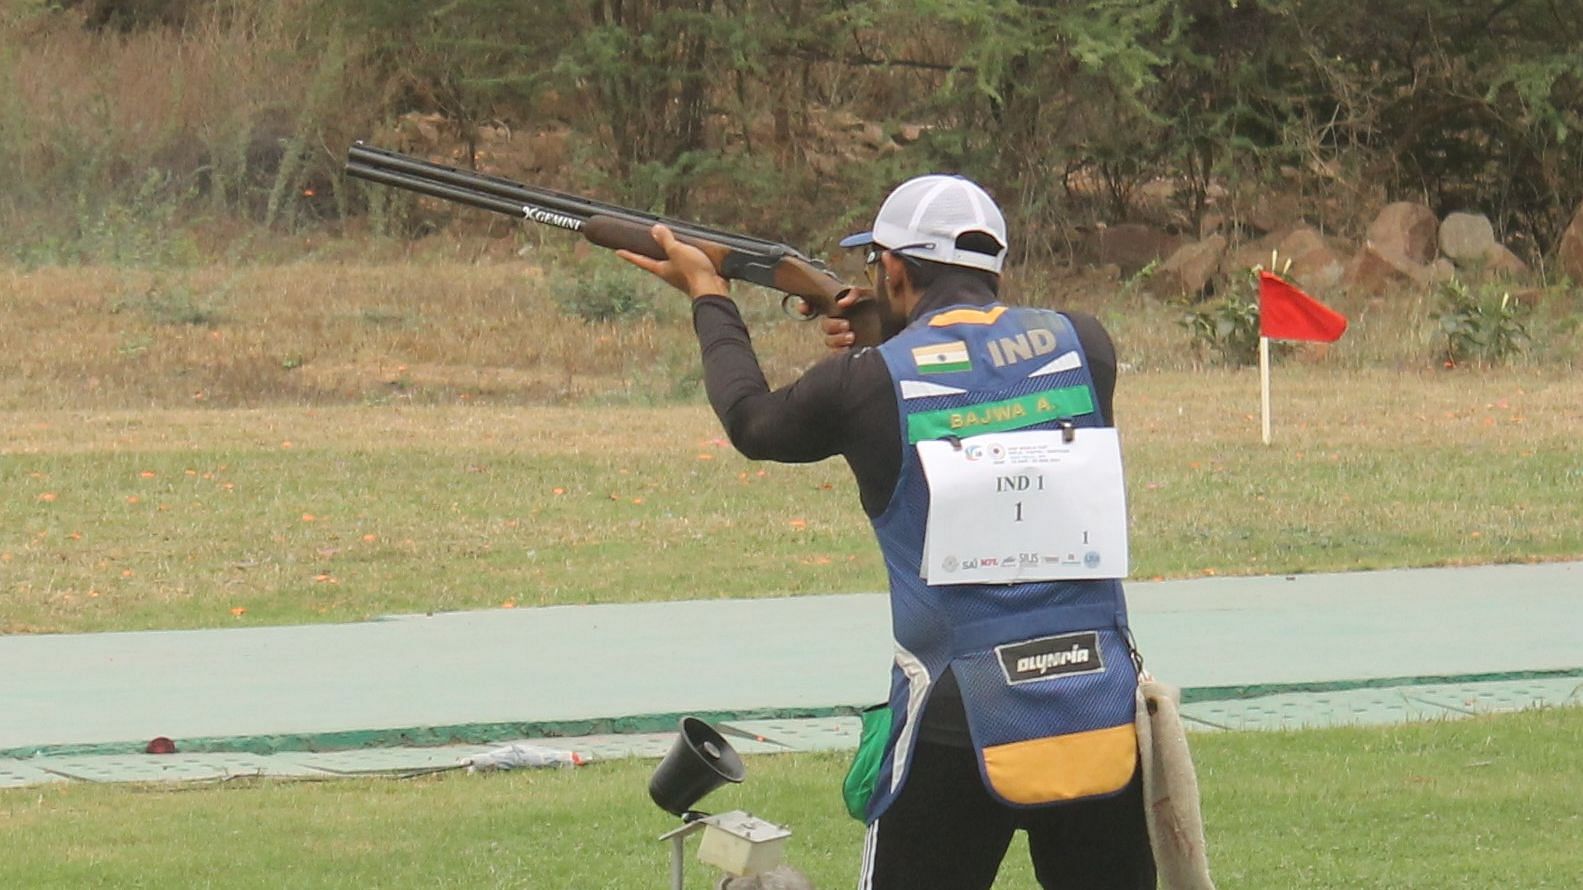 <div class="paragraphs"><p>No Indian qualified for the final of the men's skeet event on Day 3 of the Tokyo Olympics.</p></div>